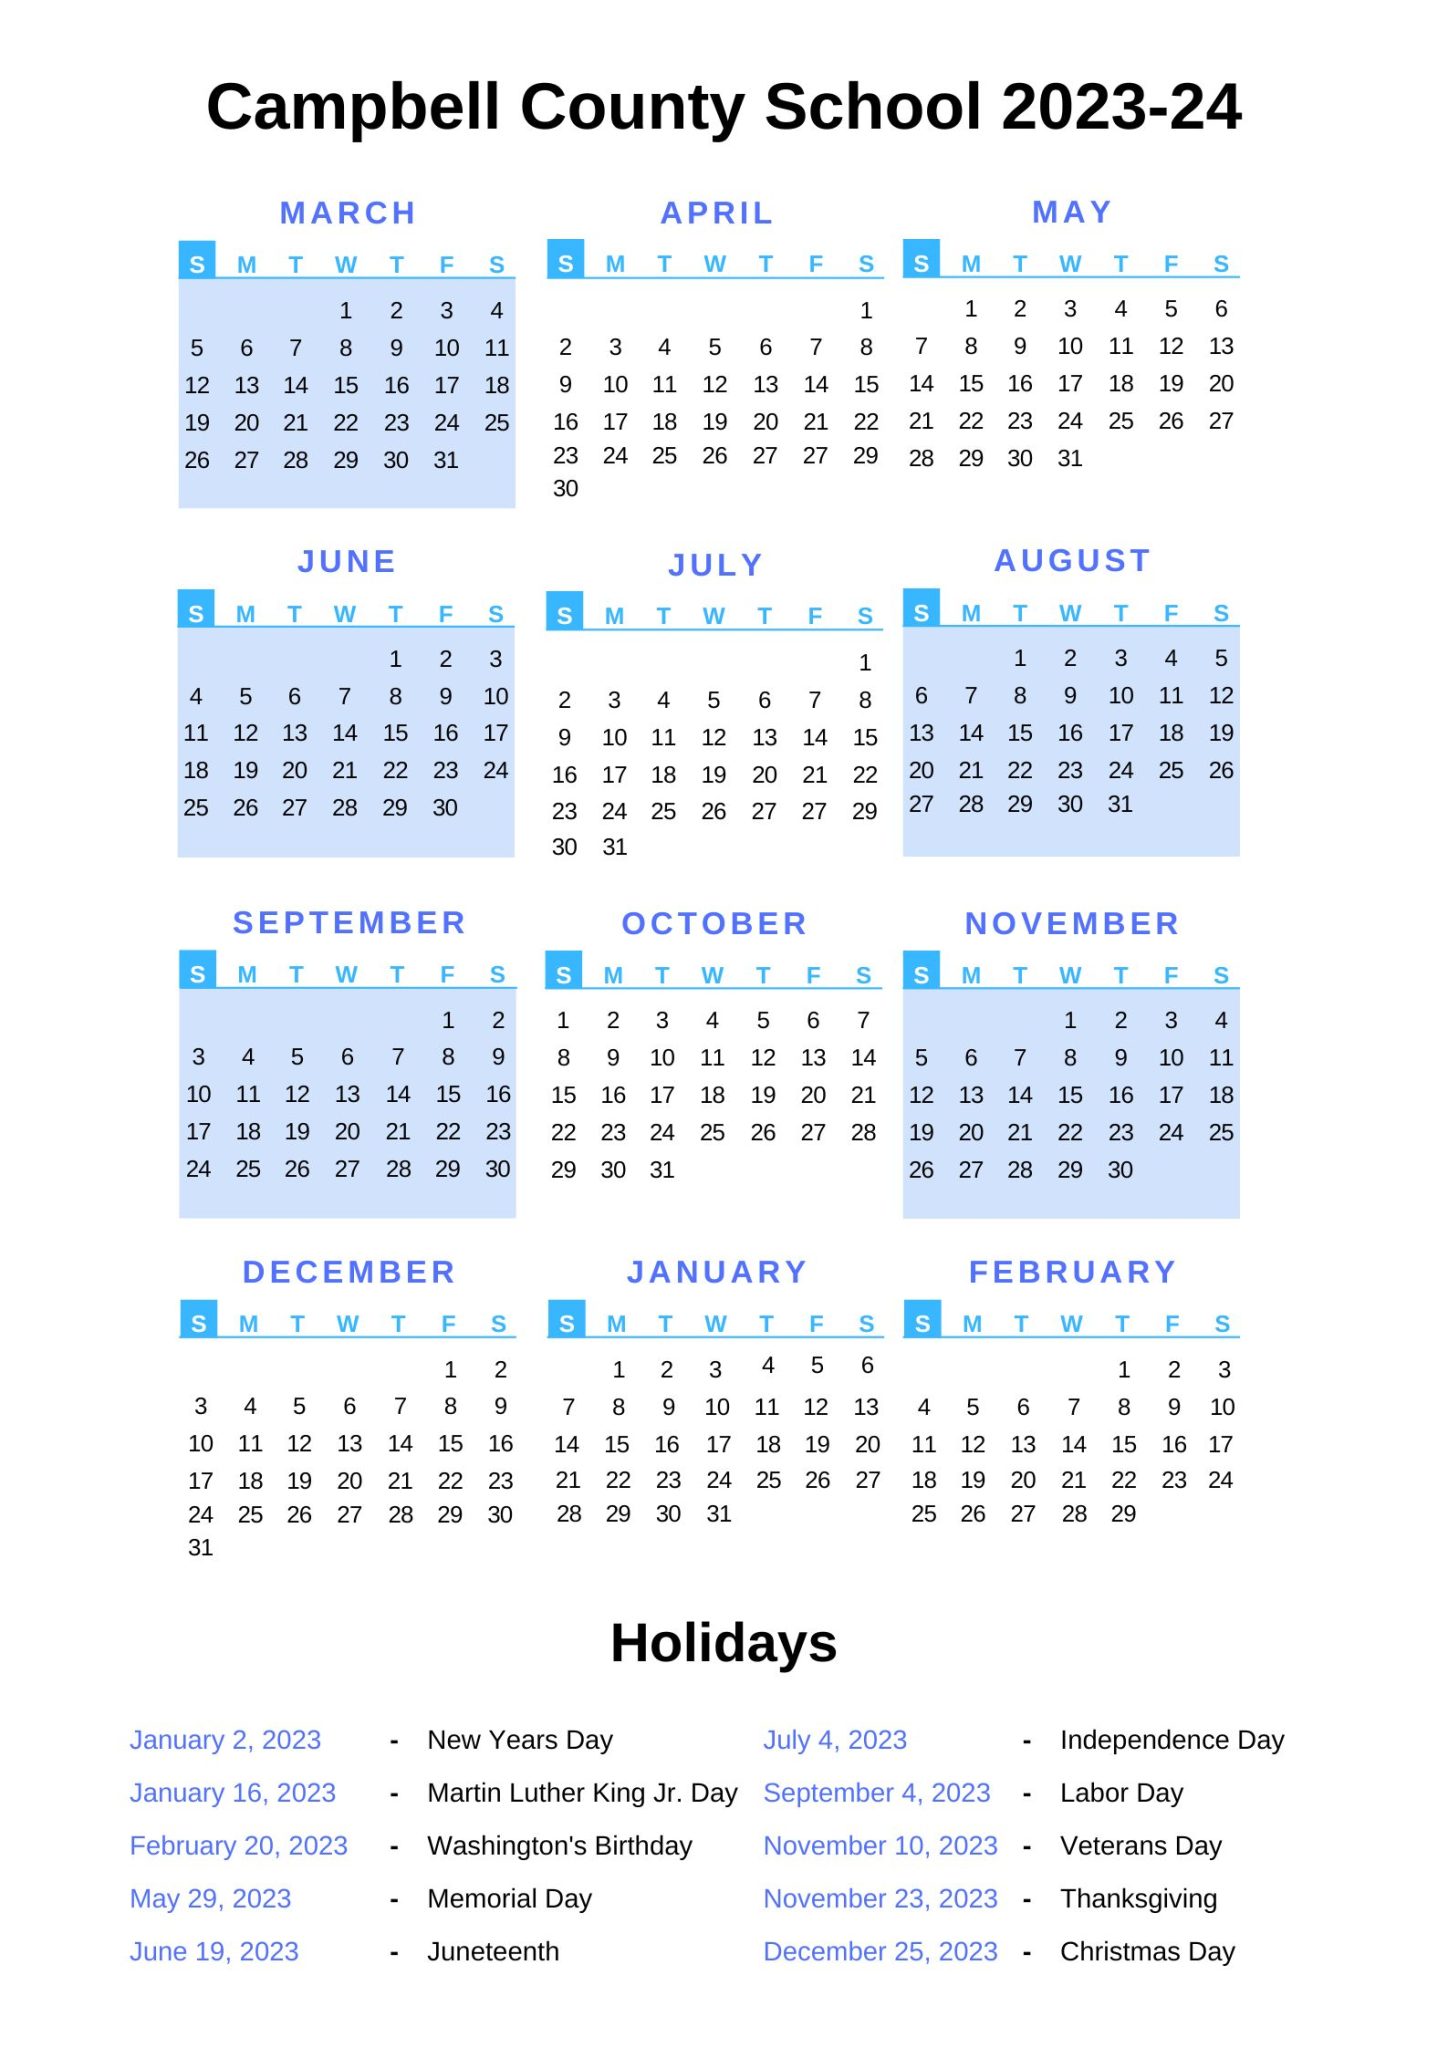 Campbell County Schools Calendar 2023 24 with Holidays